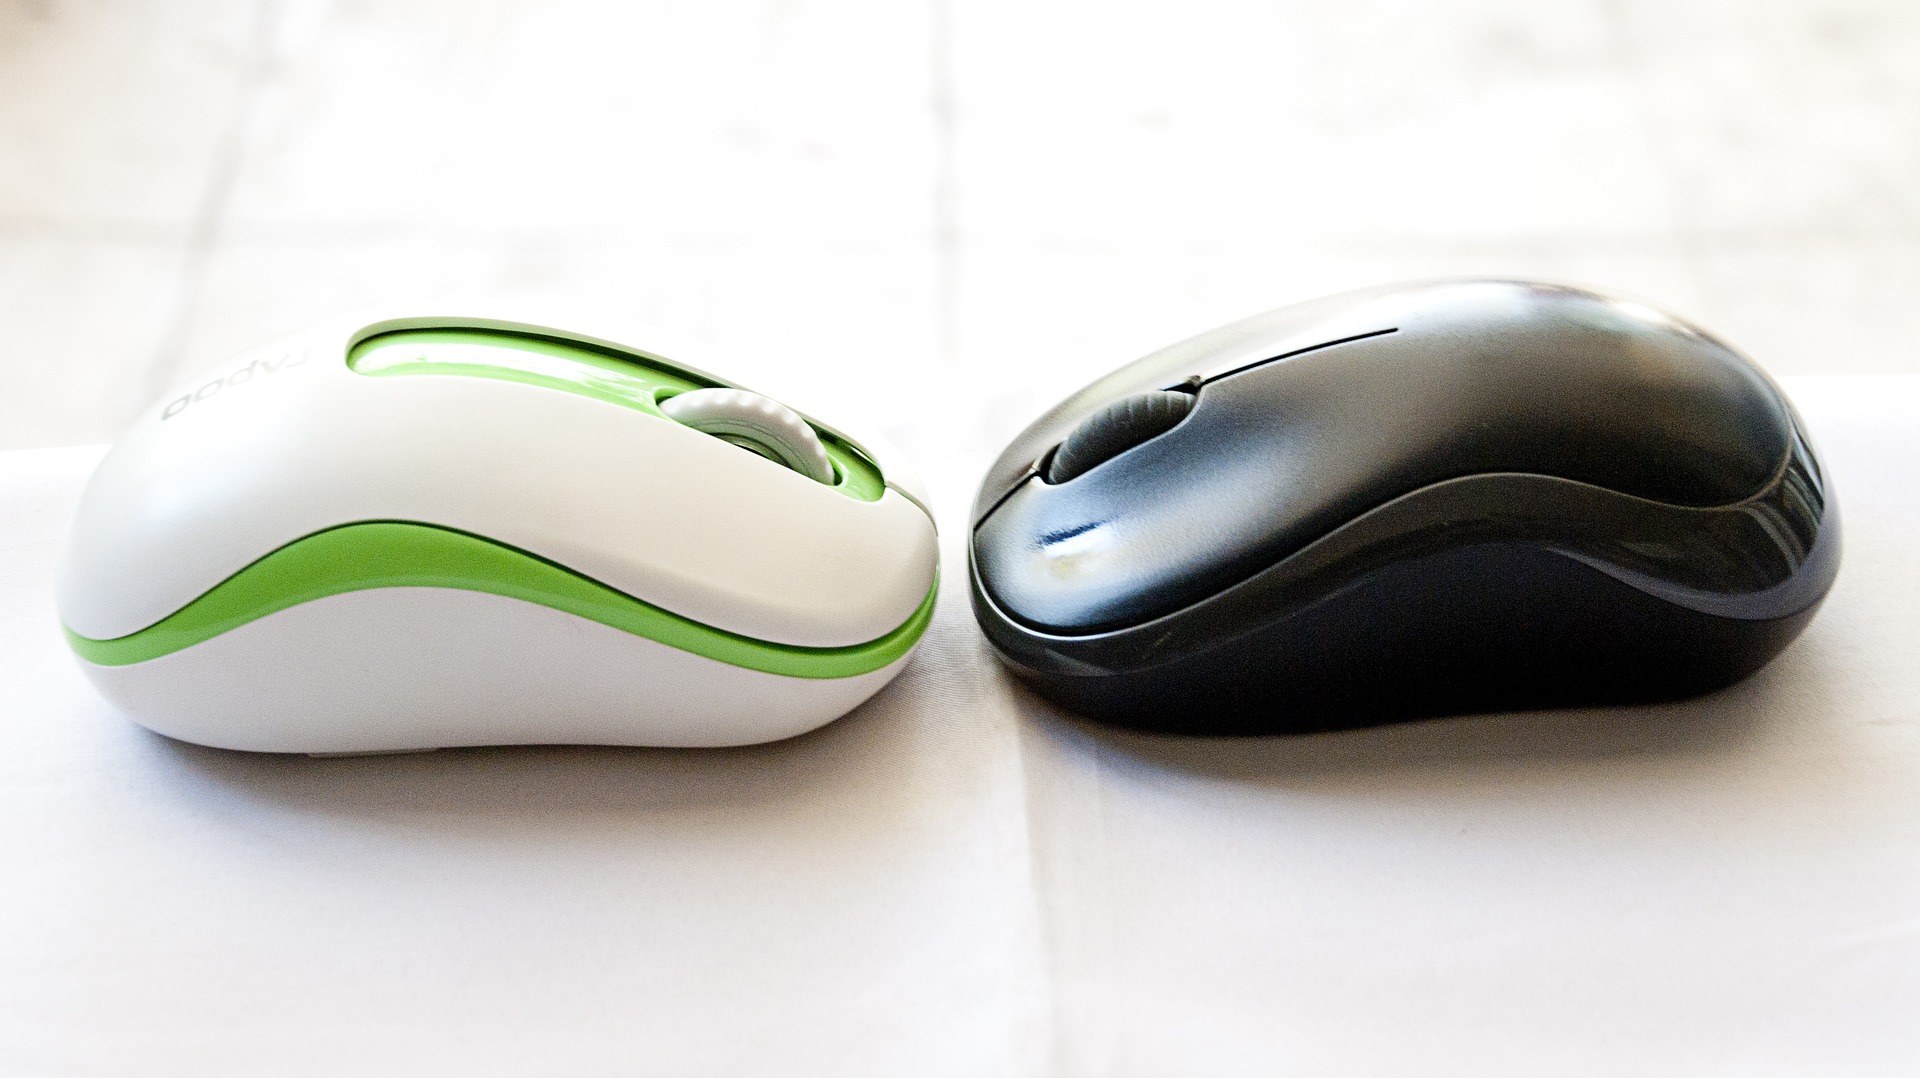 How to pair your Bluetooth Mouse to Mac OS 